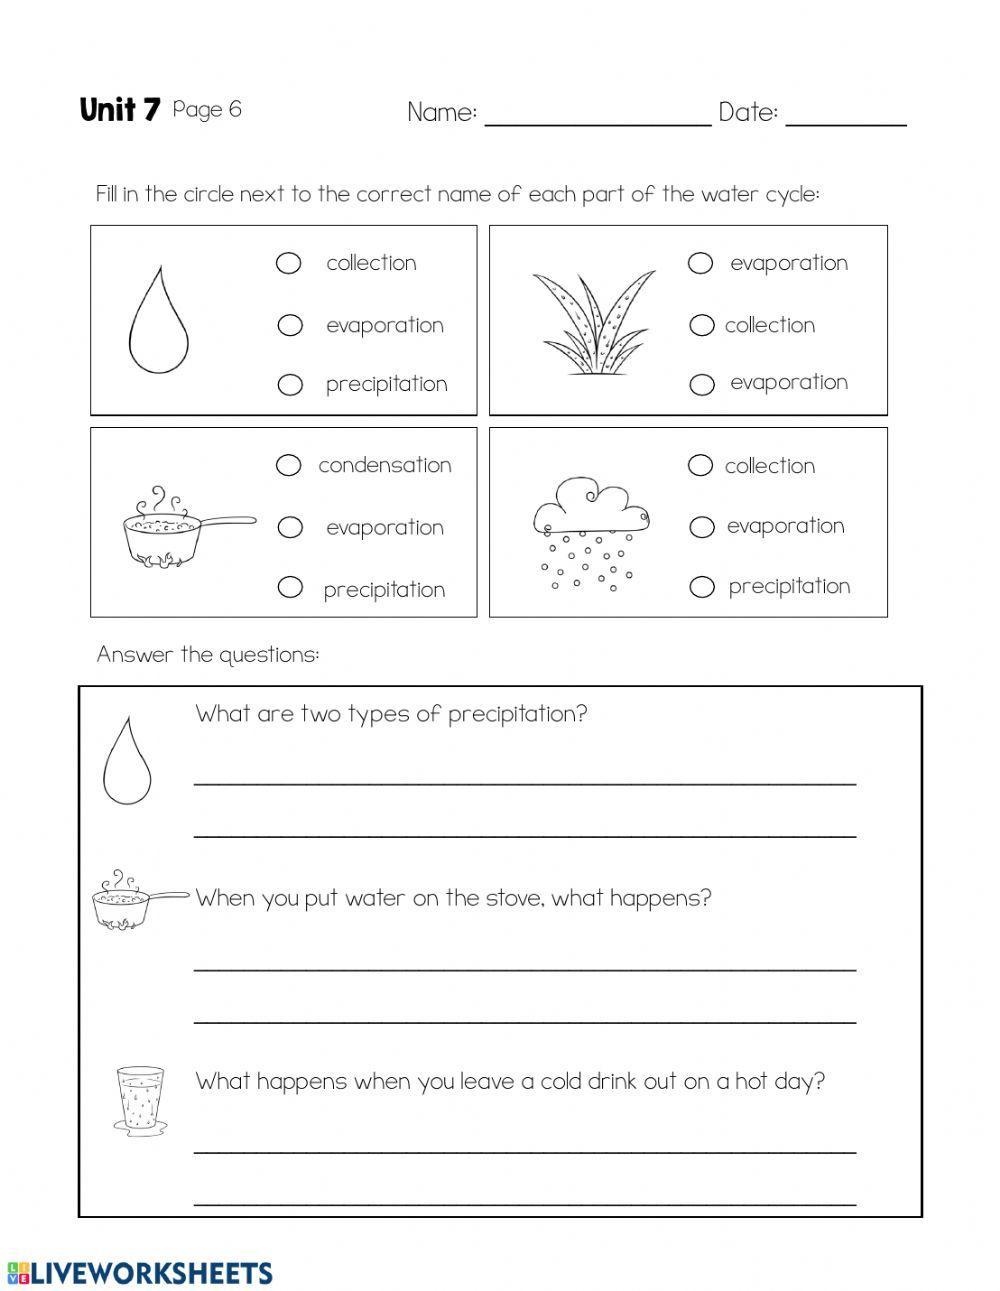 The Water Cycle - Day 2